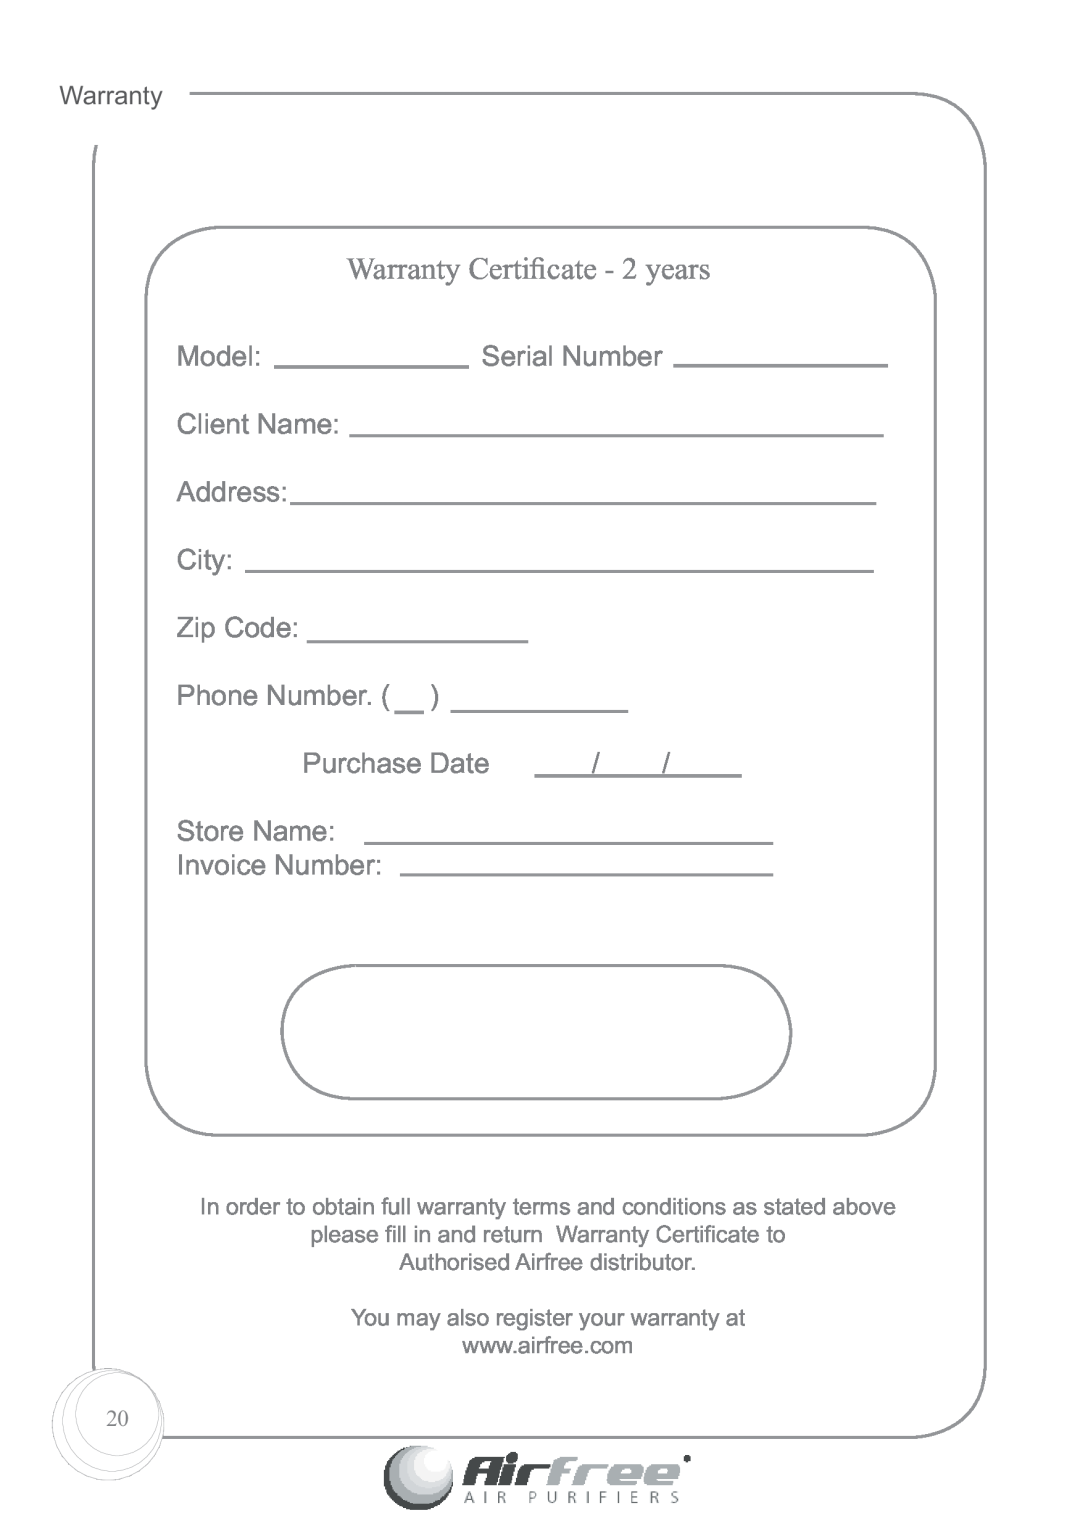 Airfree Platinum 125 Warranty Certiﬁcate - 2 years, Model, Serial Number, Client Name, Address, City, Zip Code, Store Name 